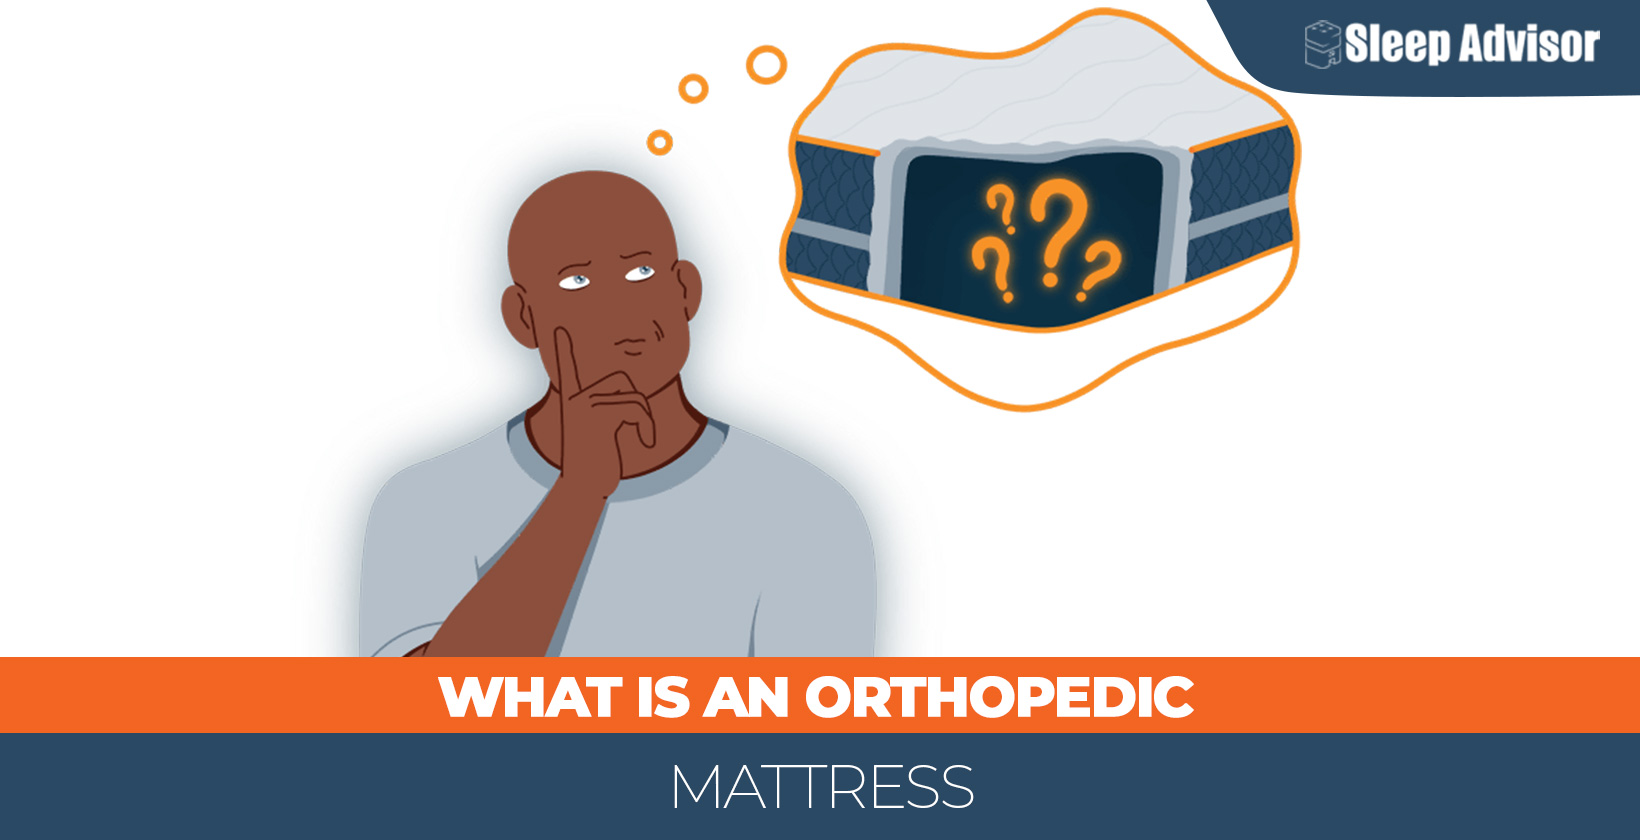 What is an Orthopedic mattress